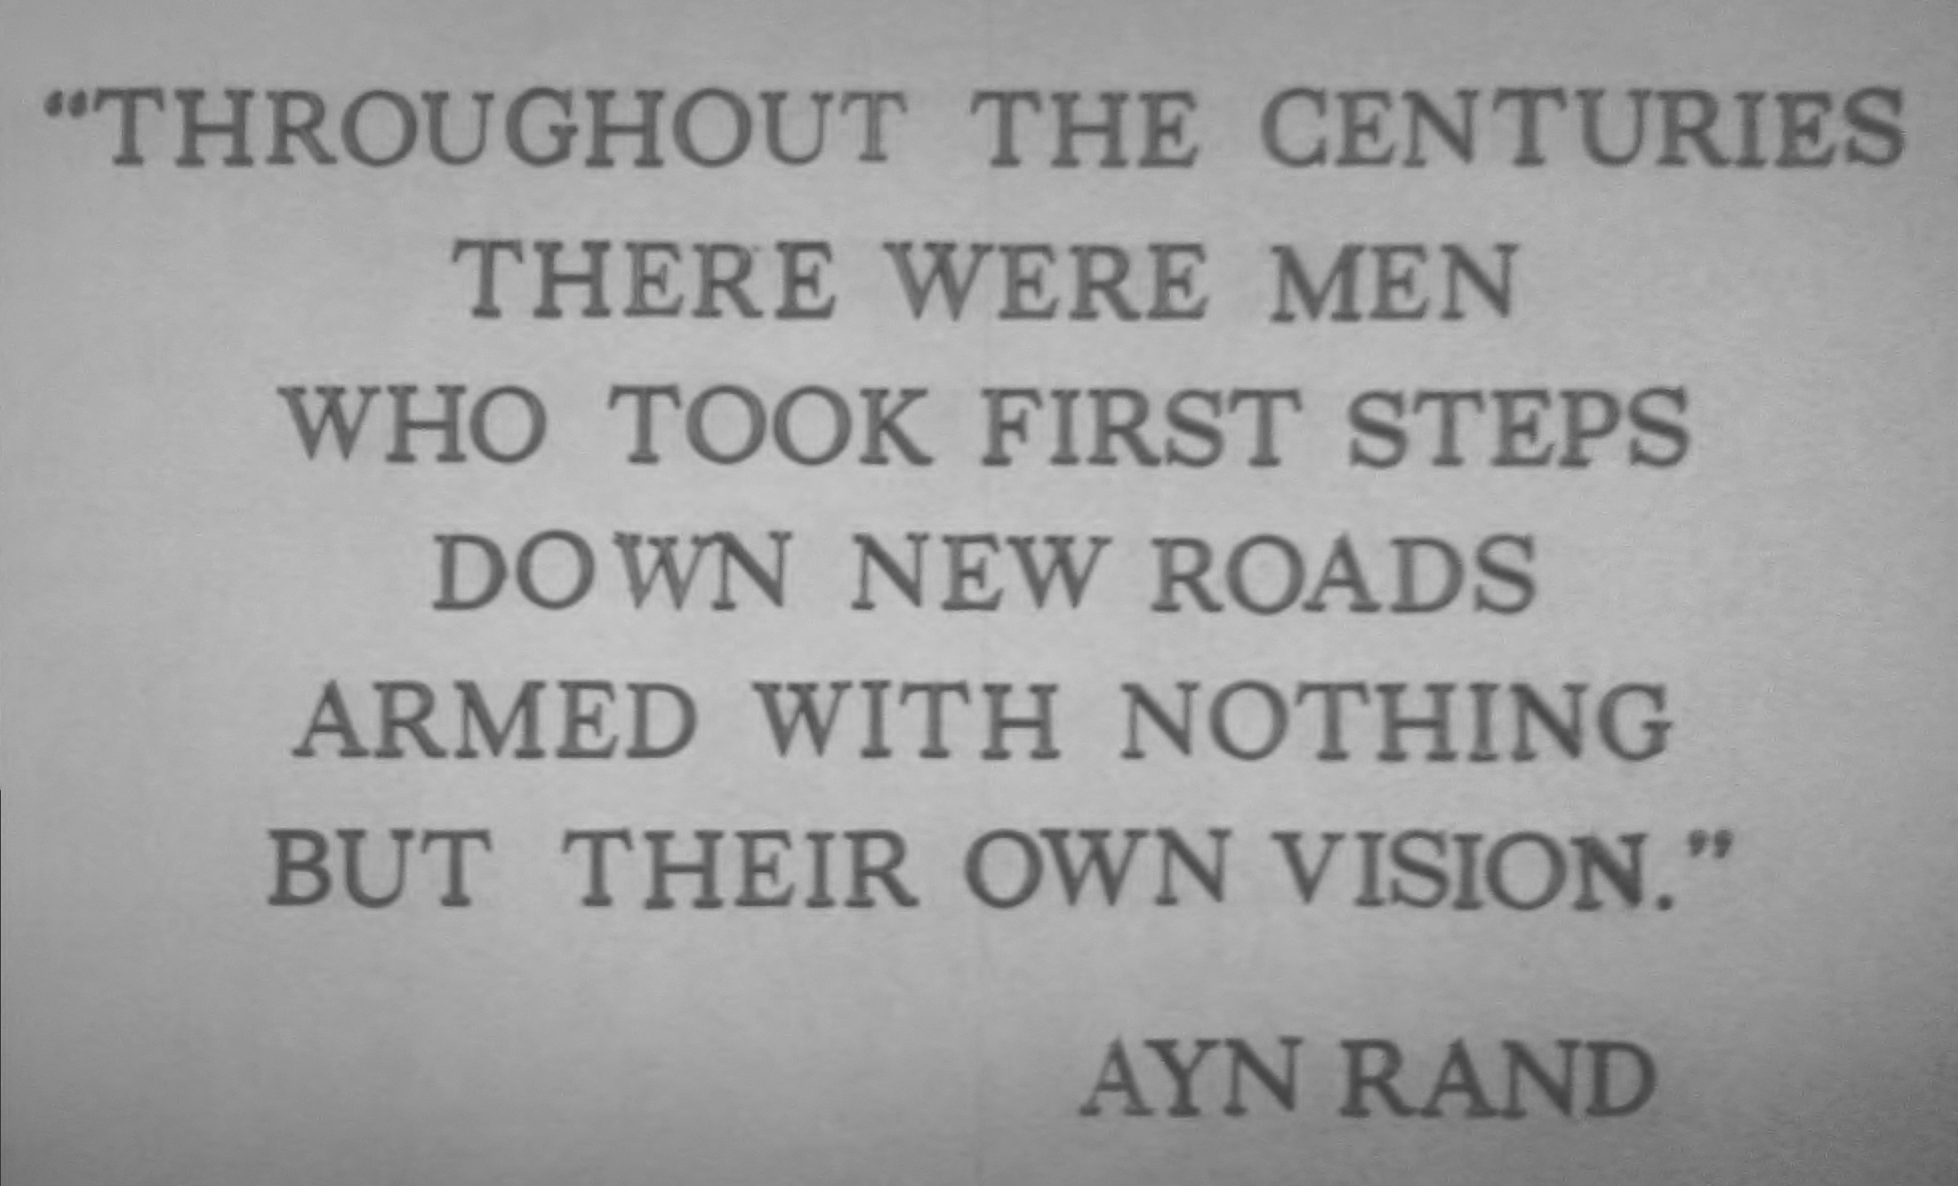 Ayn Rand quote